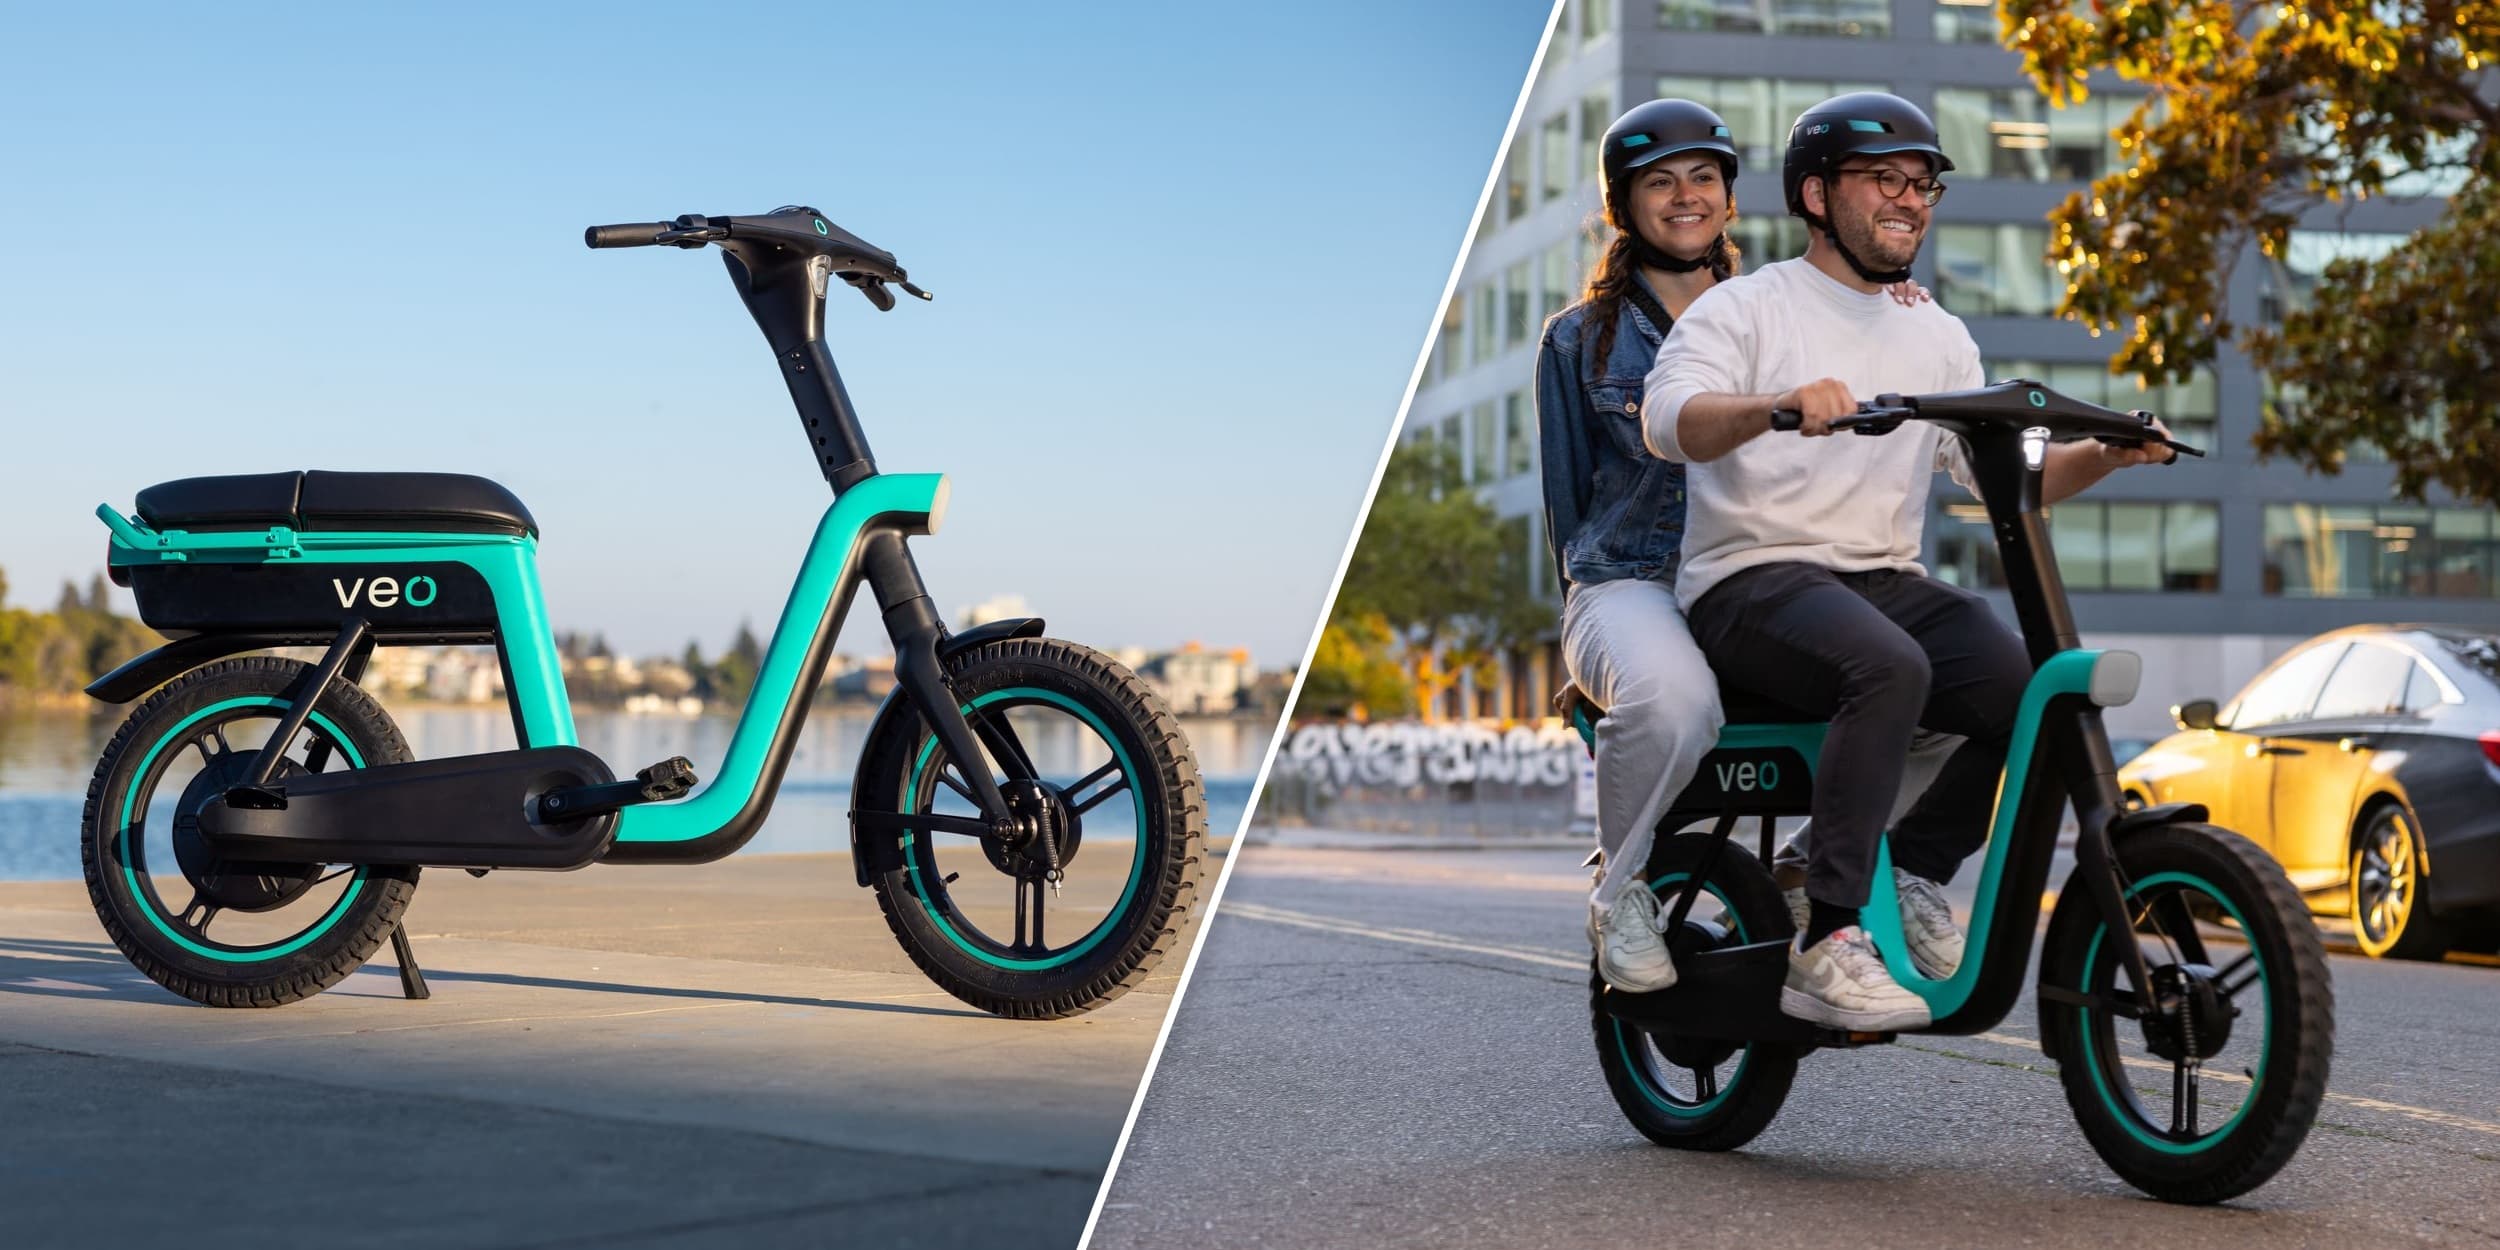 Generator Lang spille klaver Veo unveils new shared two-seater electric scooter, doubling utility